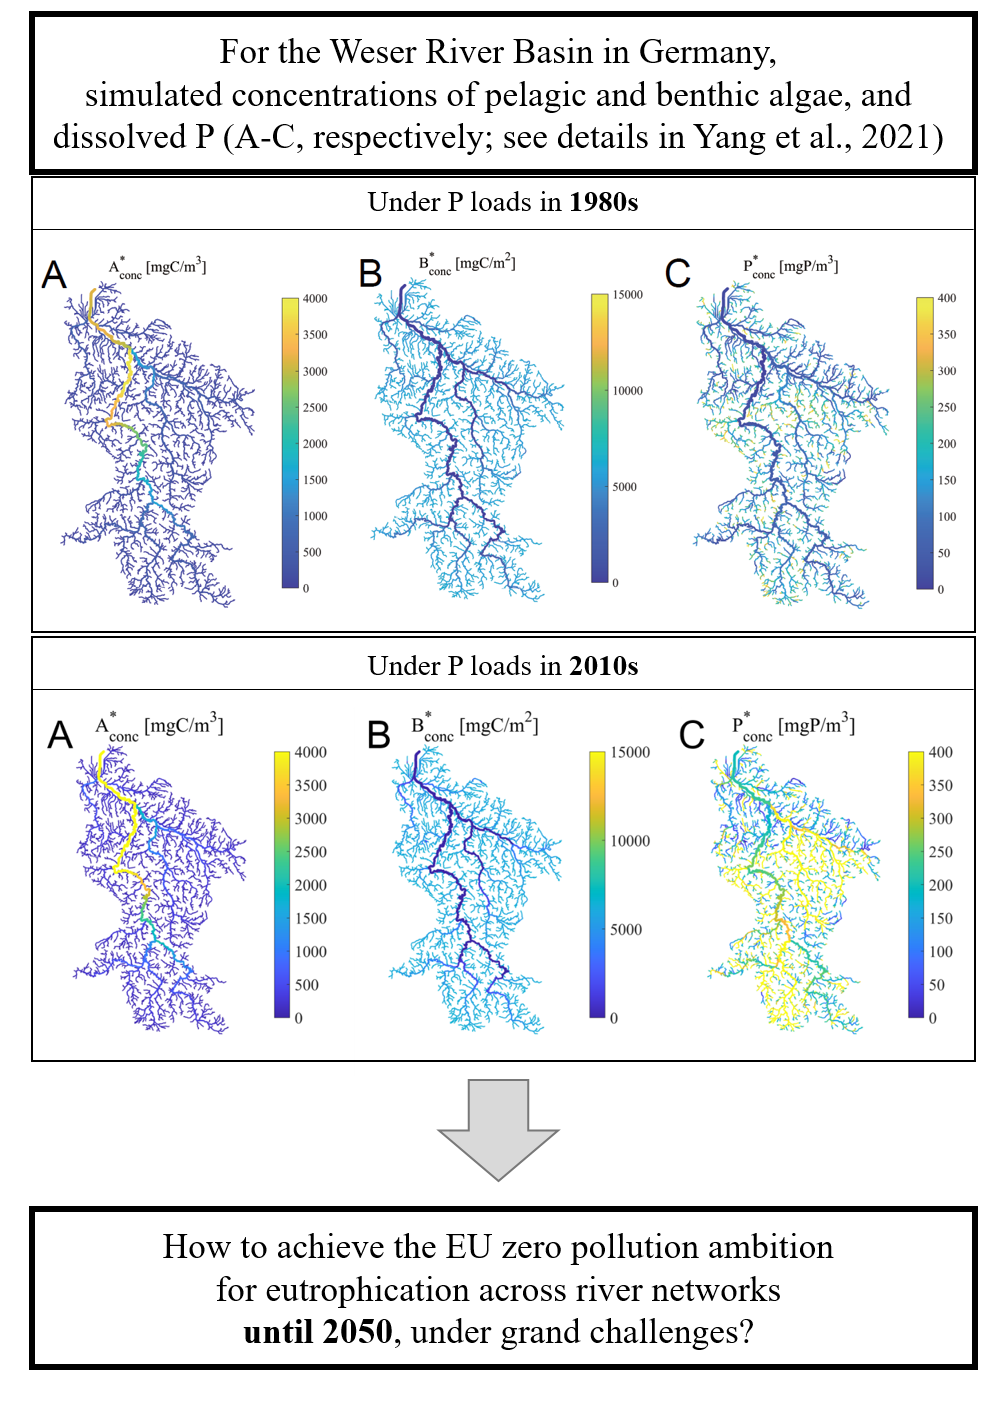 simulated algae concetrations in Weser river basin, from Yang et al., 2021